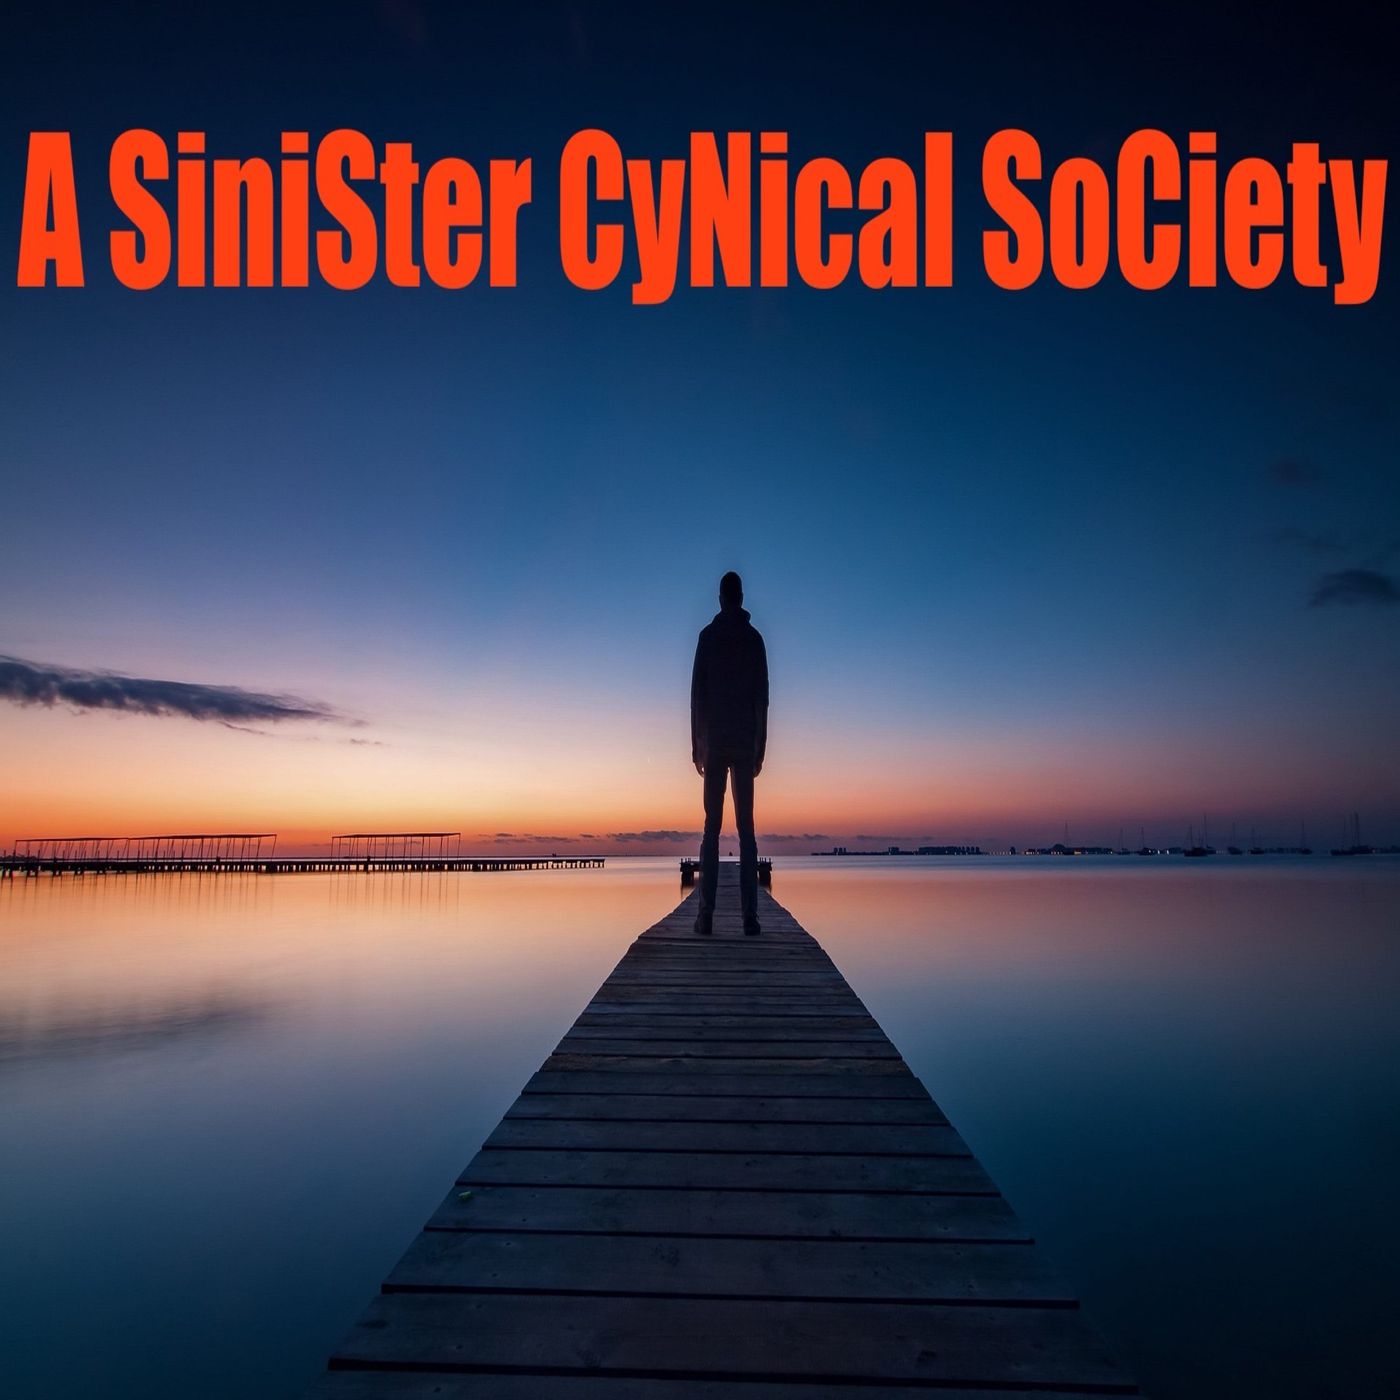 Episode 28 - "A Sinister Cynical Society"